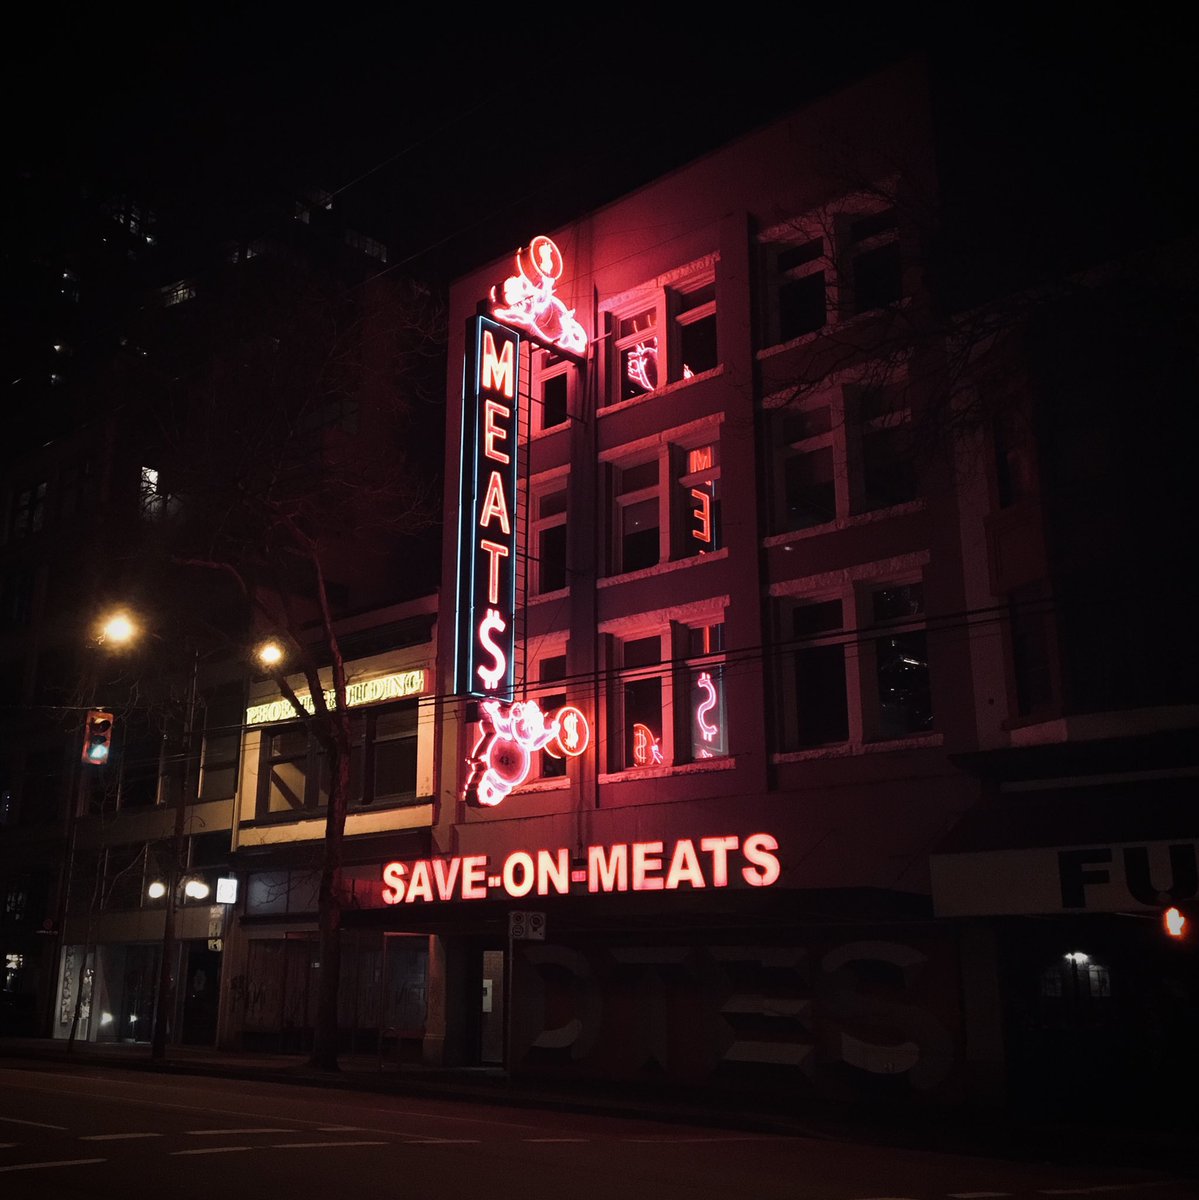 Downtown neon glow

#ExploreVancouver #neonSigns #Vancouver #signs